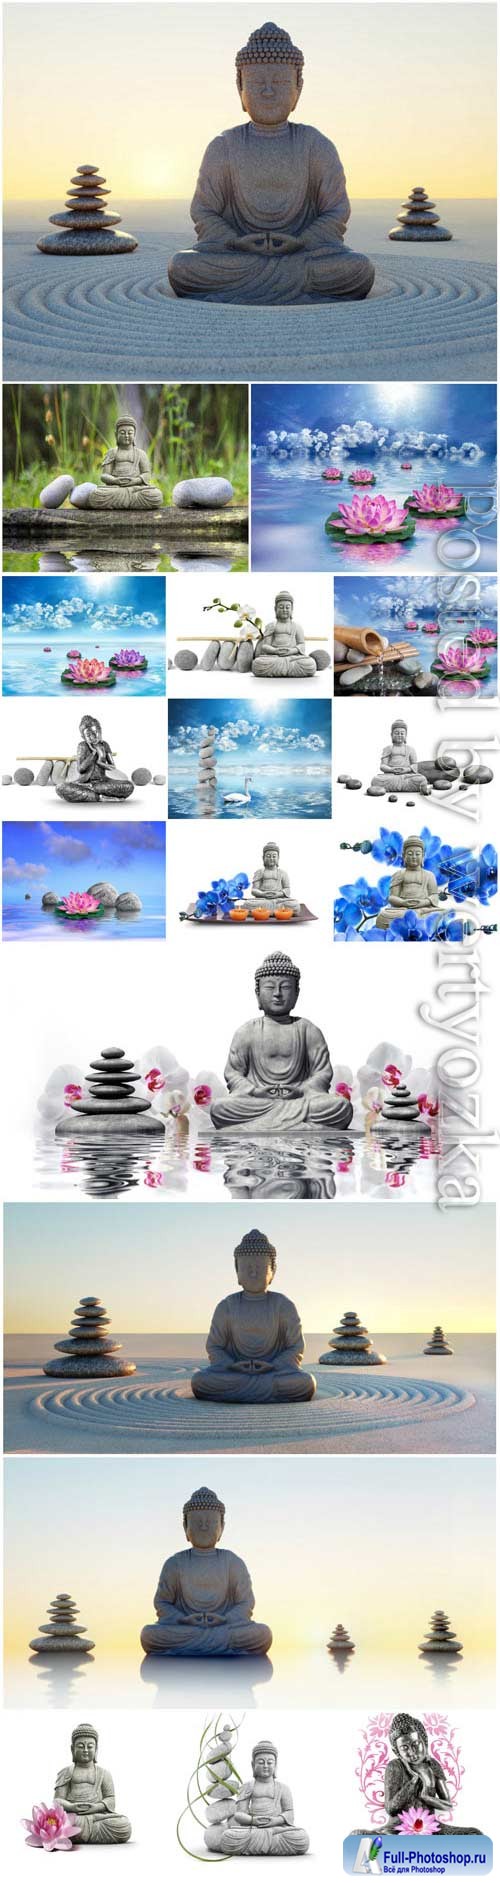 Buddha, spa stones and orchids stock photo